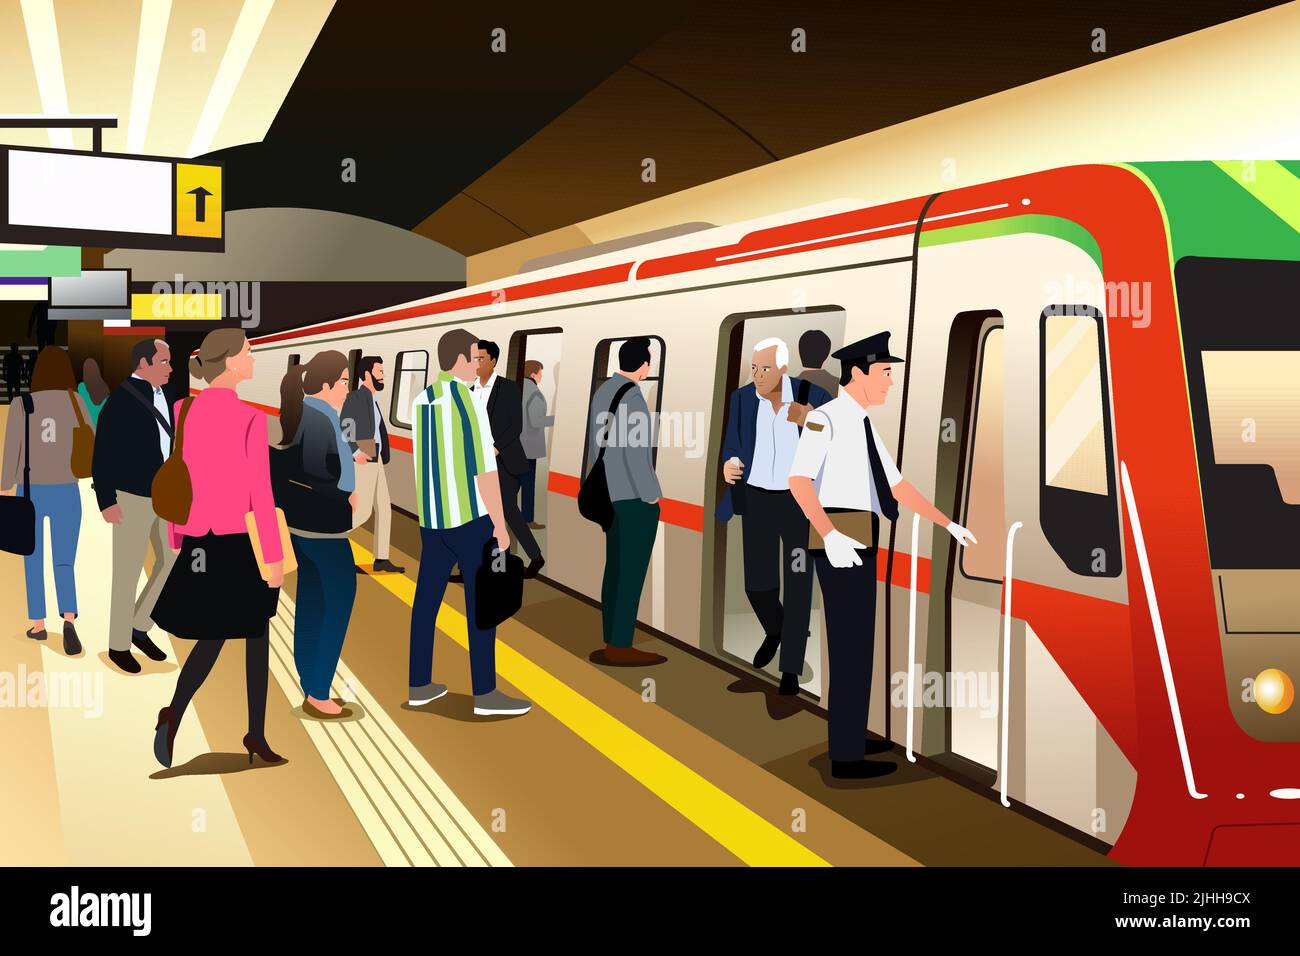 A vector illustration of People Commuting Using Subway Stock Vector